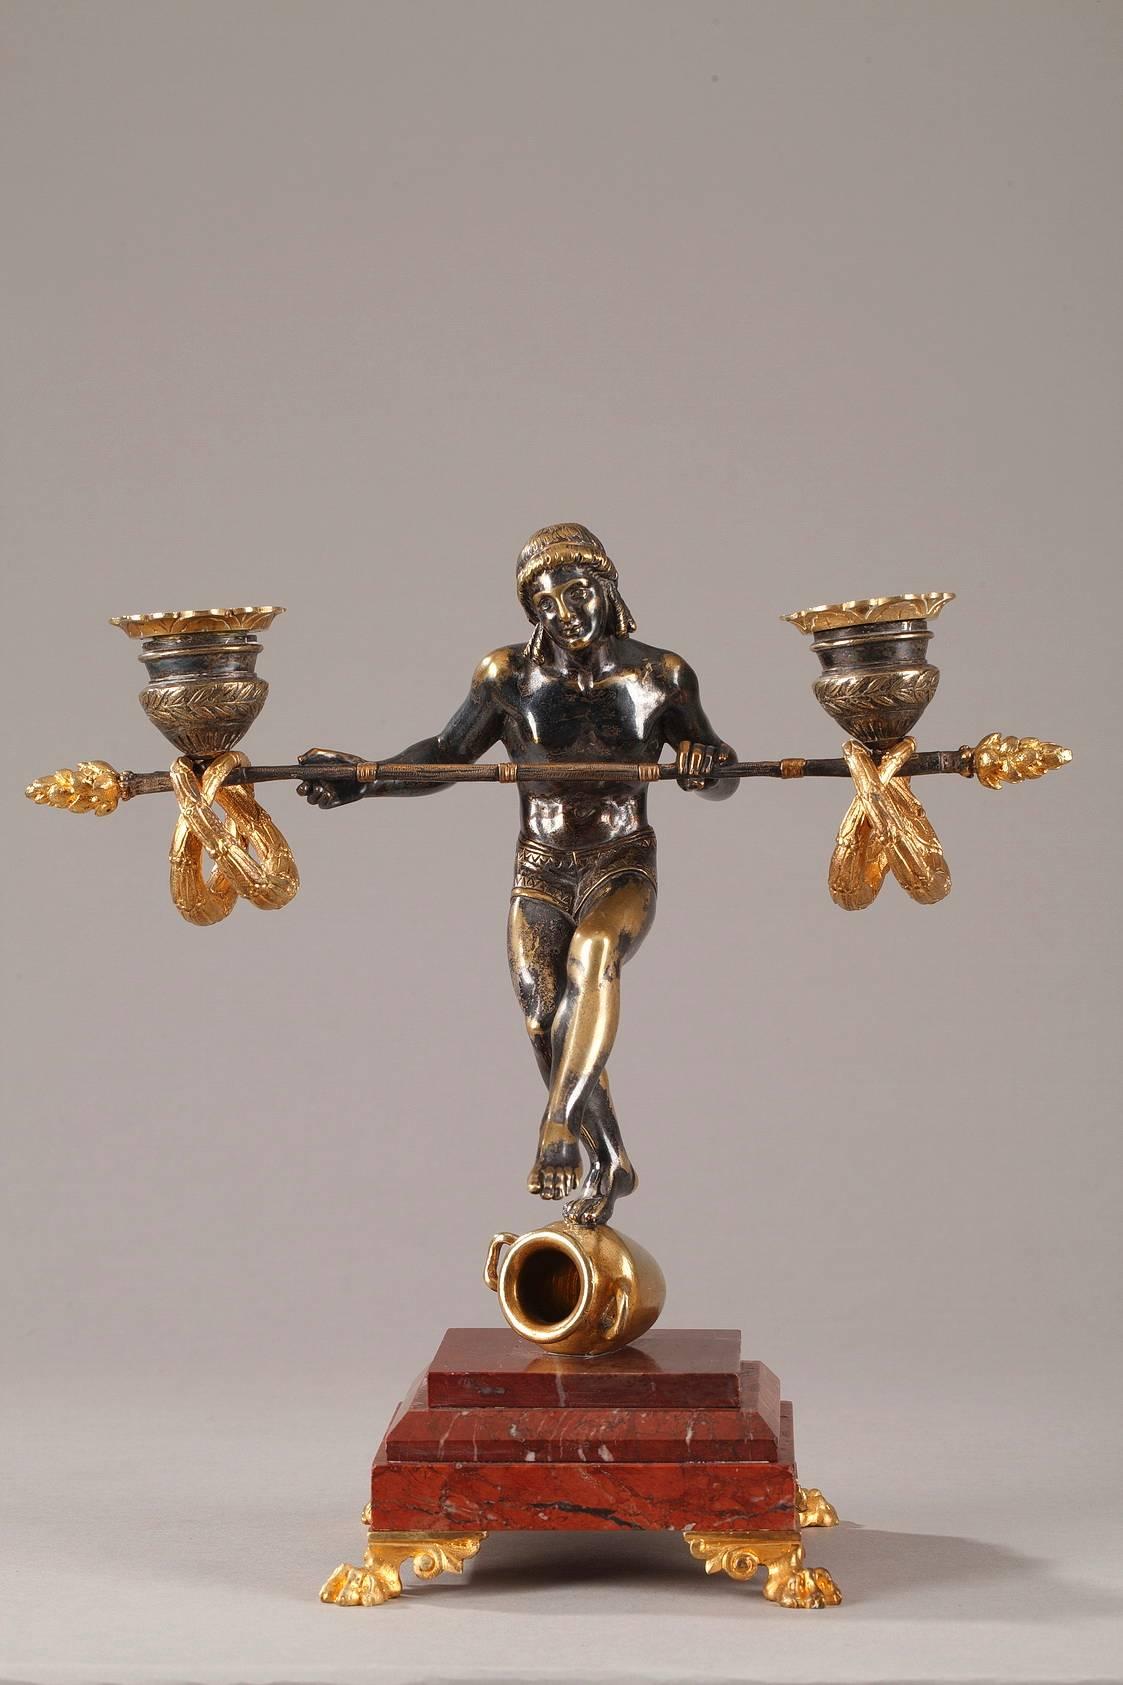 Original pair of gilt bronze candlesticks decorated with Greek acrobats. They are poised on Amphora, holding balancing rods which support garlands and the candle sockets. The candlesticks are set on square, red marble bases above four gilt bronze